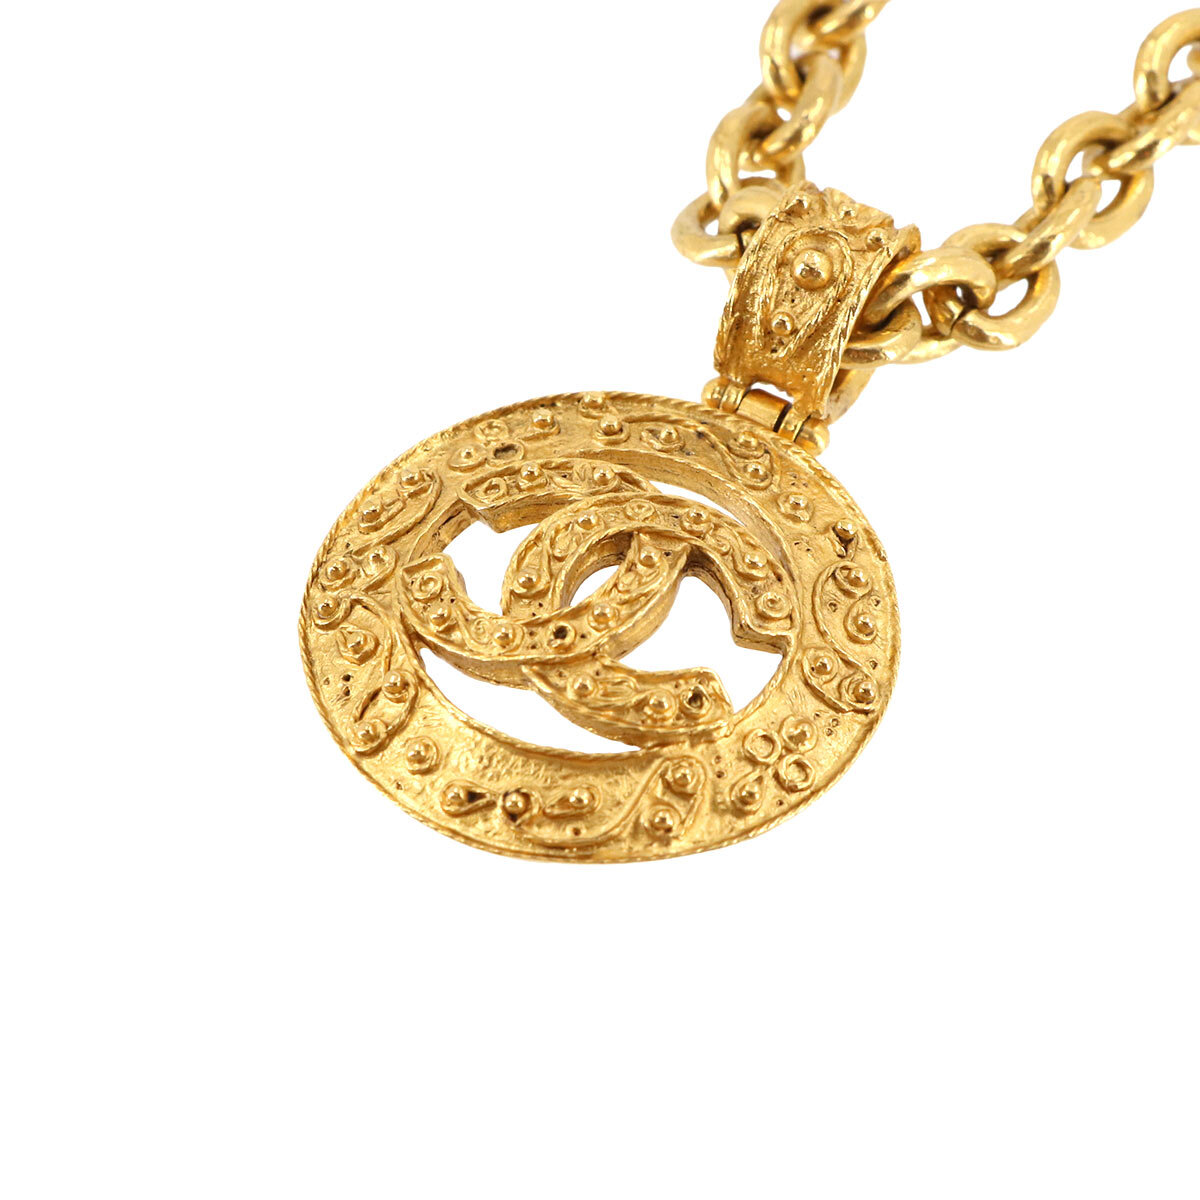  Chanel CHANEL here Mark long necklace Gold 94A Vintage accessory Necklace 90230743